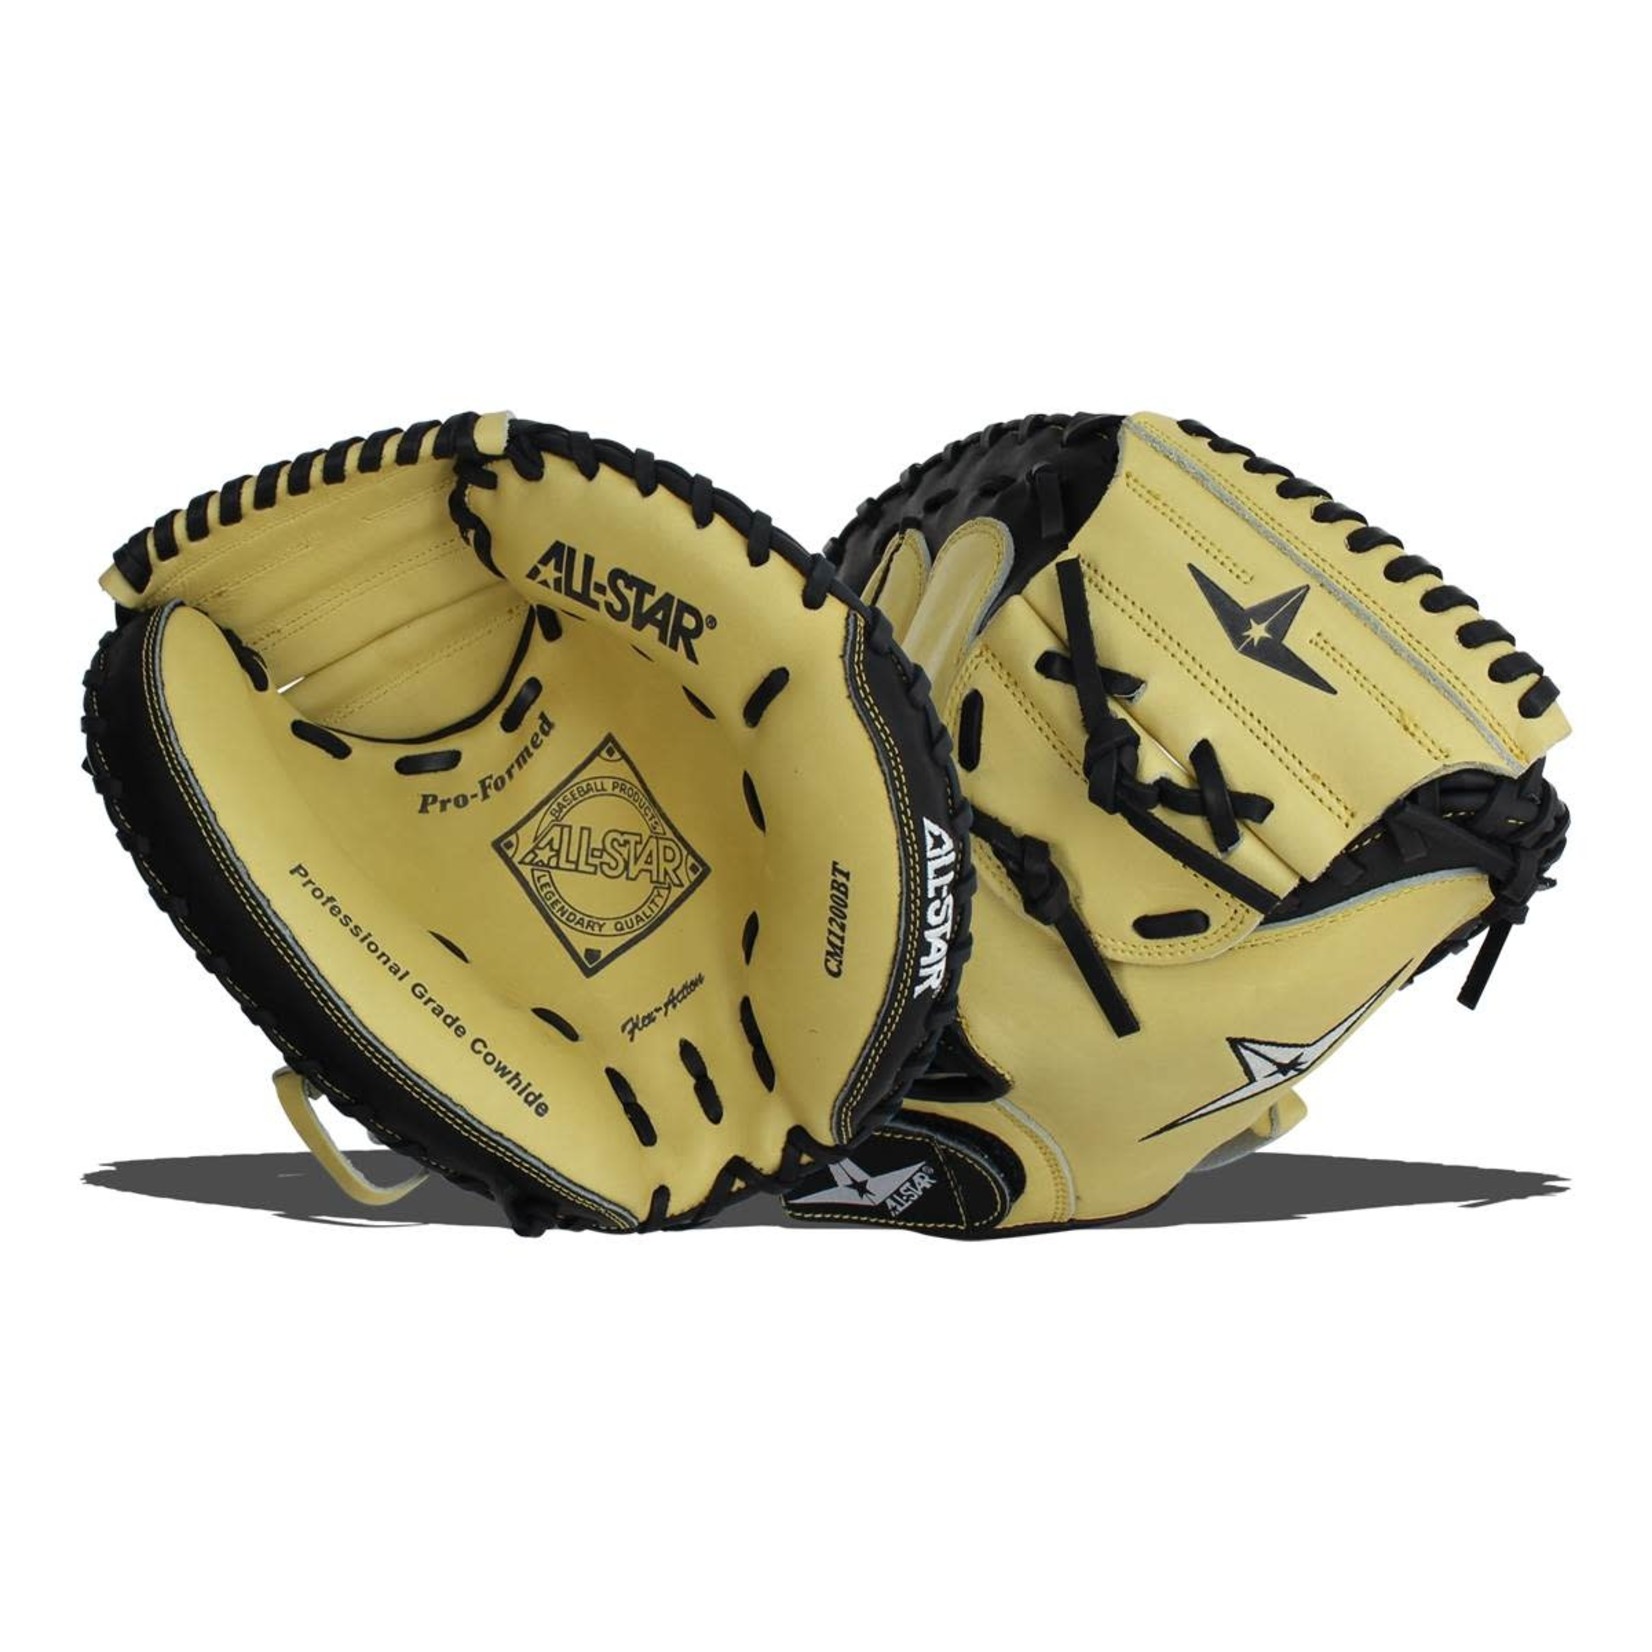 All Star All-Star 31.5” Youth Pro-Comp Series Catcher's Mitt